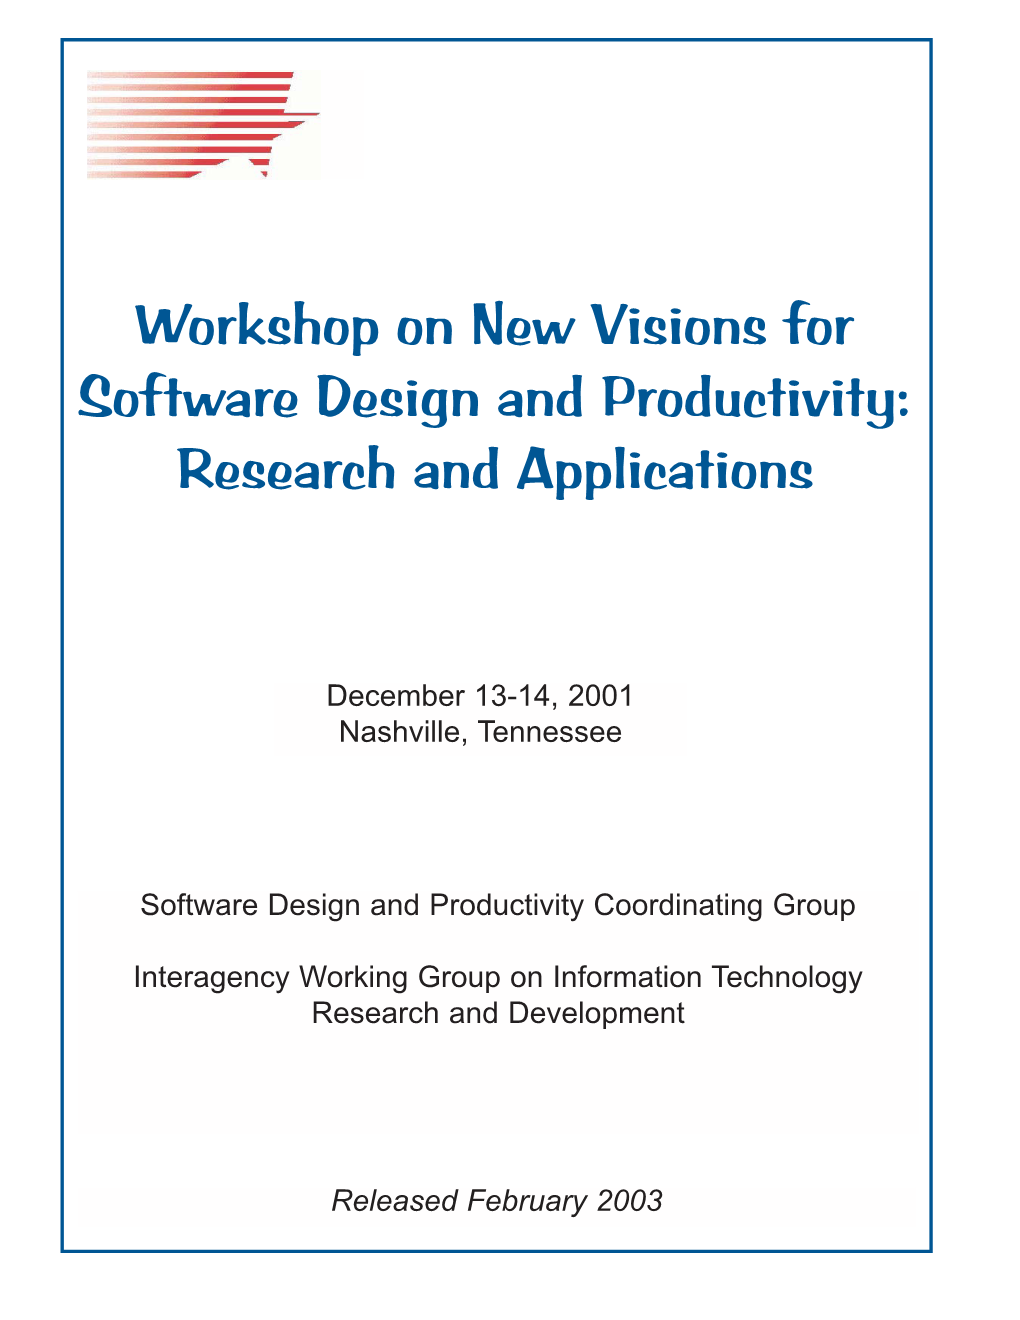 New Visions for Software Design and Productivity: Research and Applications